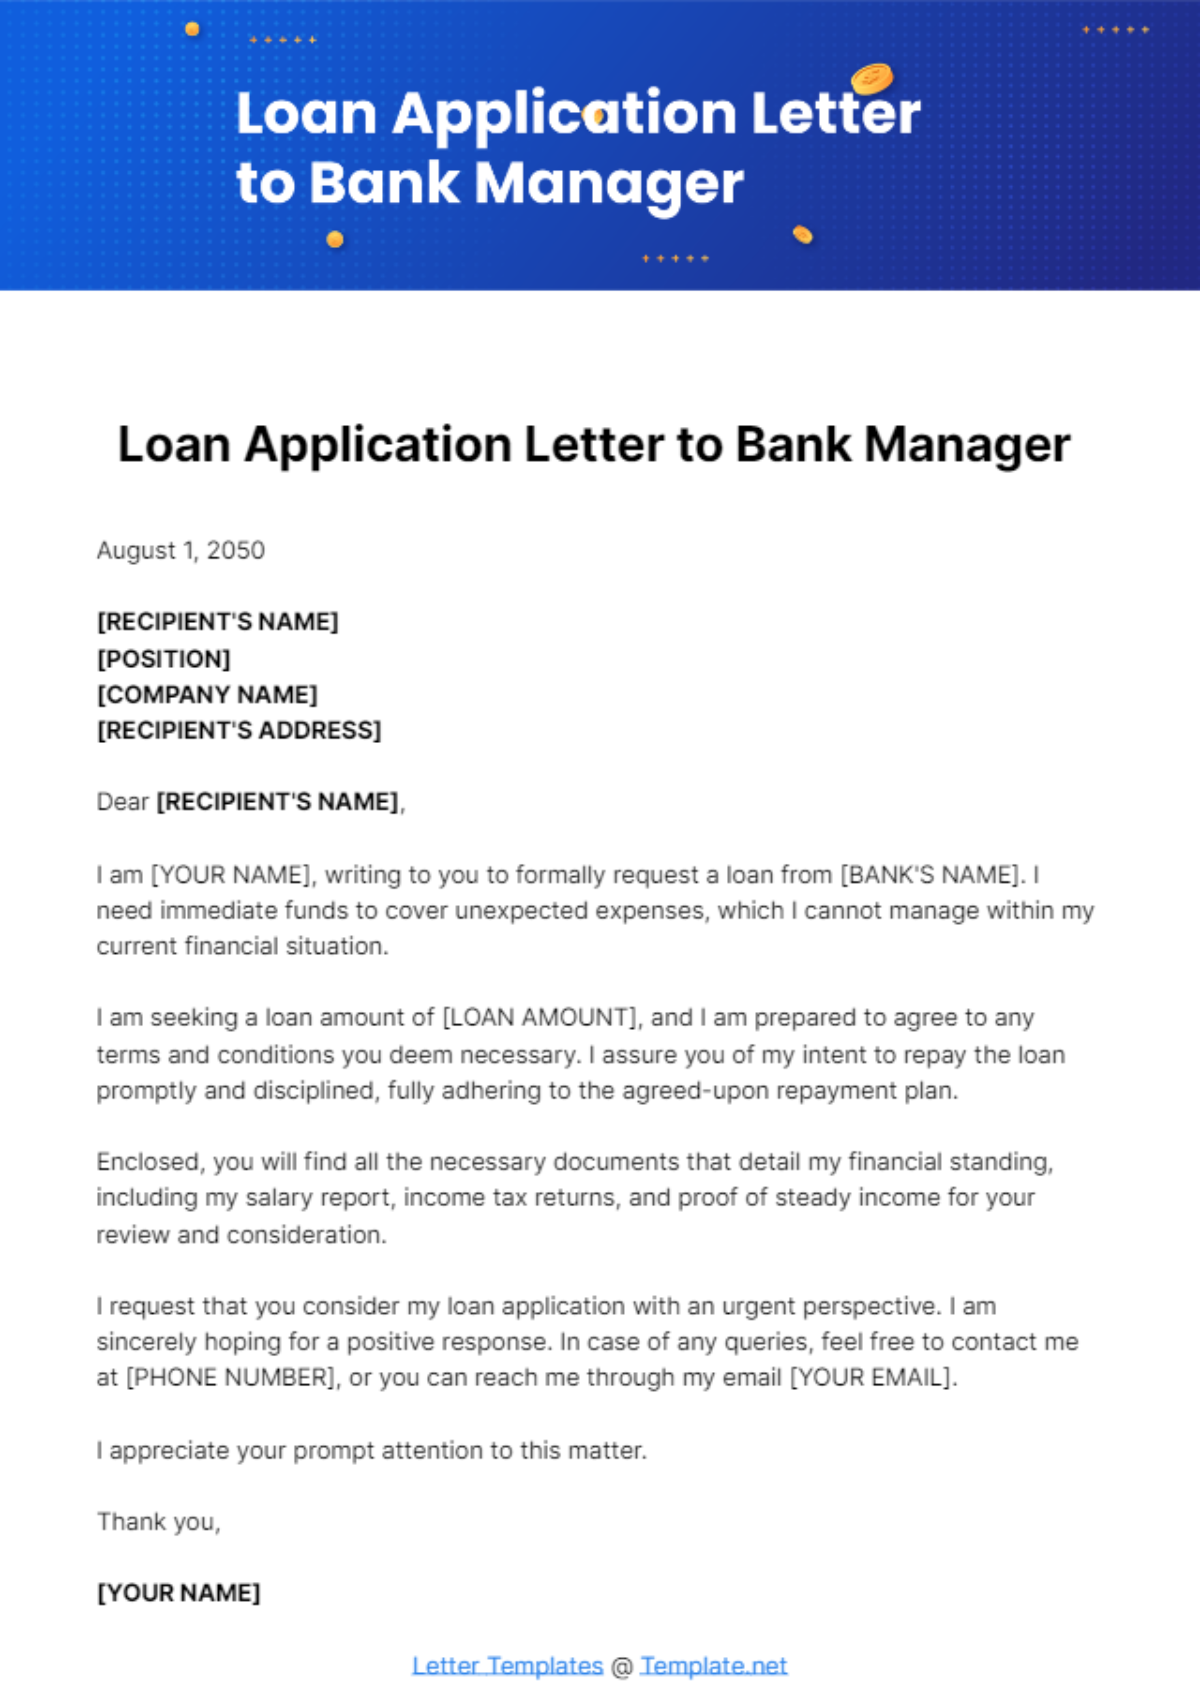 Free Loan Application Letter to Bank Manager Template